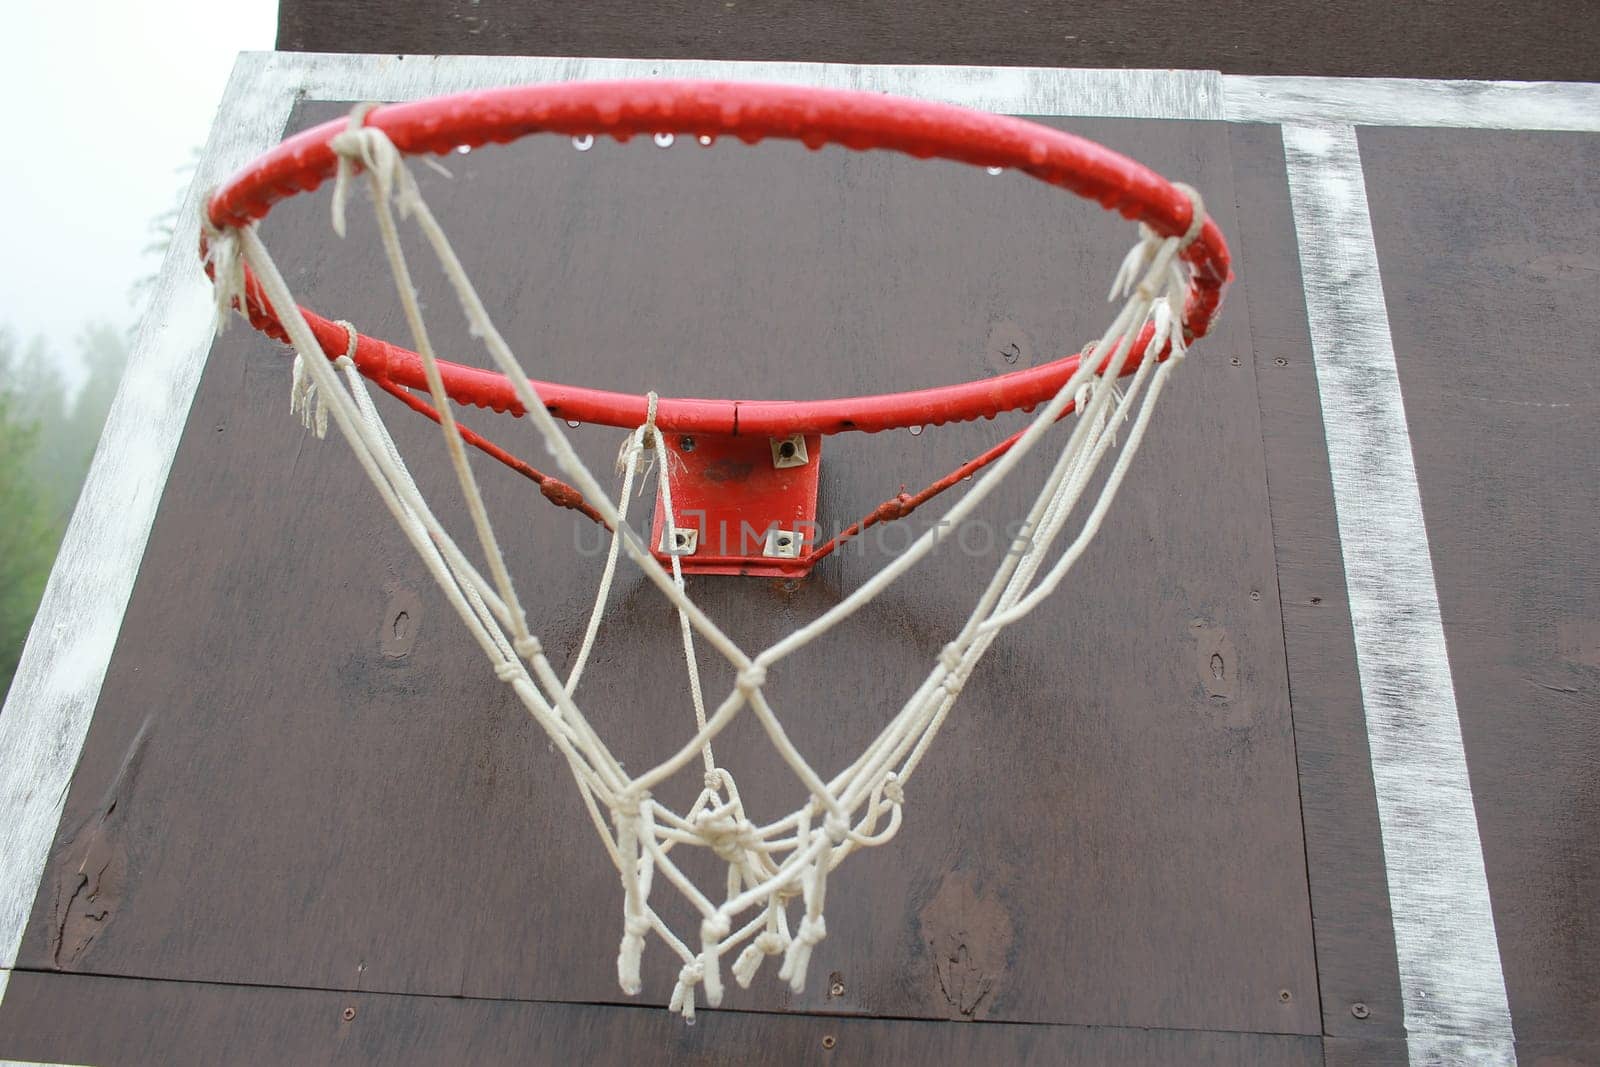 wet basketball hoop with a net after the rain. by electrovenik